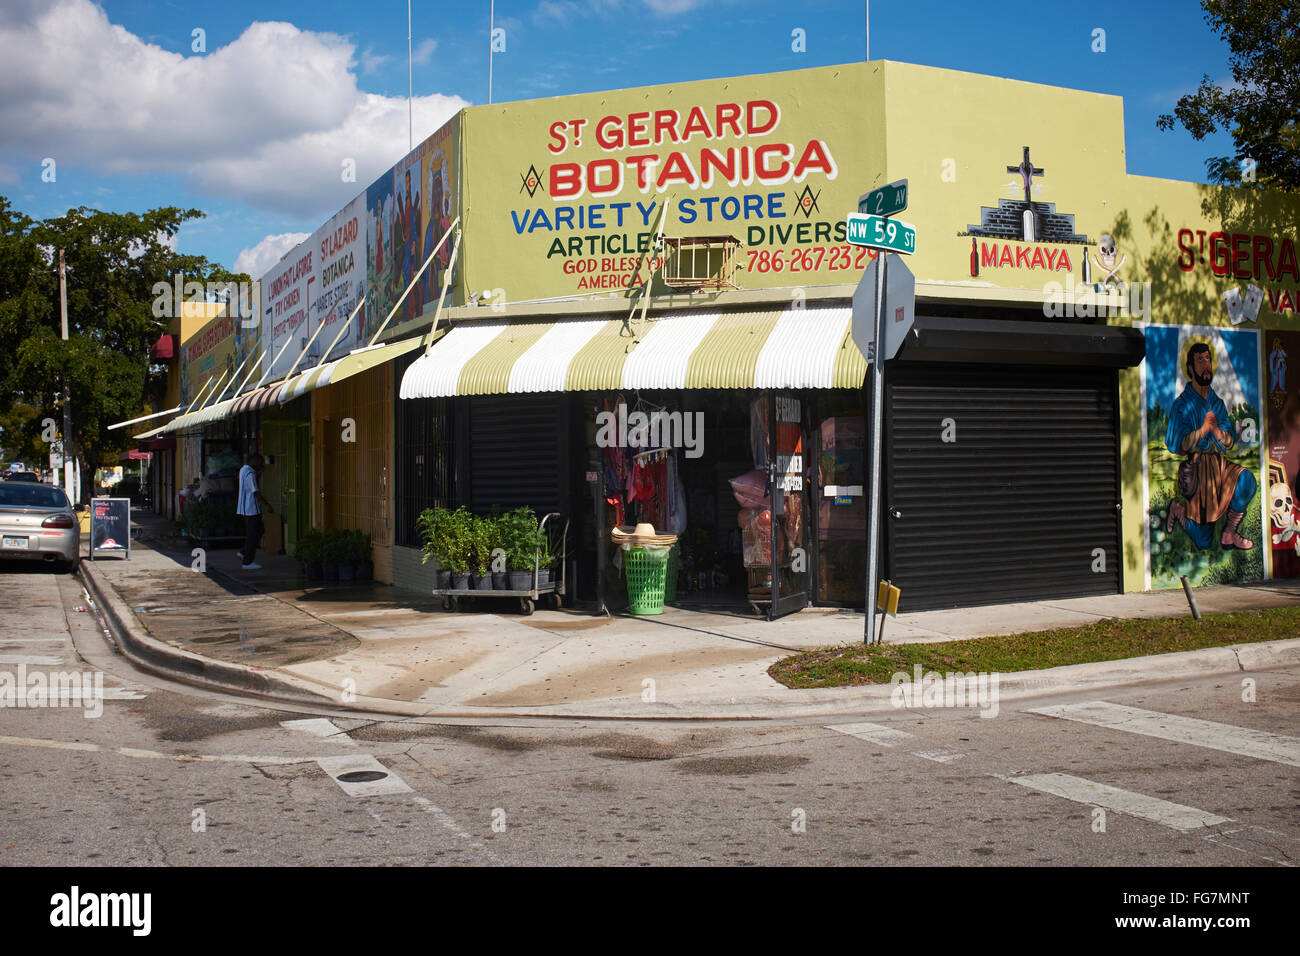 A variety store in Miami, St. Gerard Botanica Stock Photo